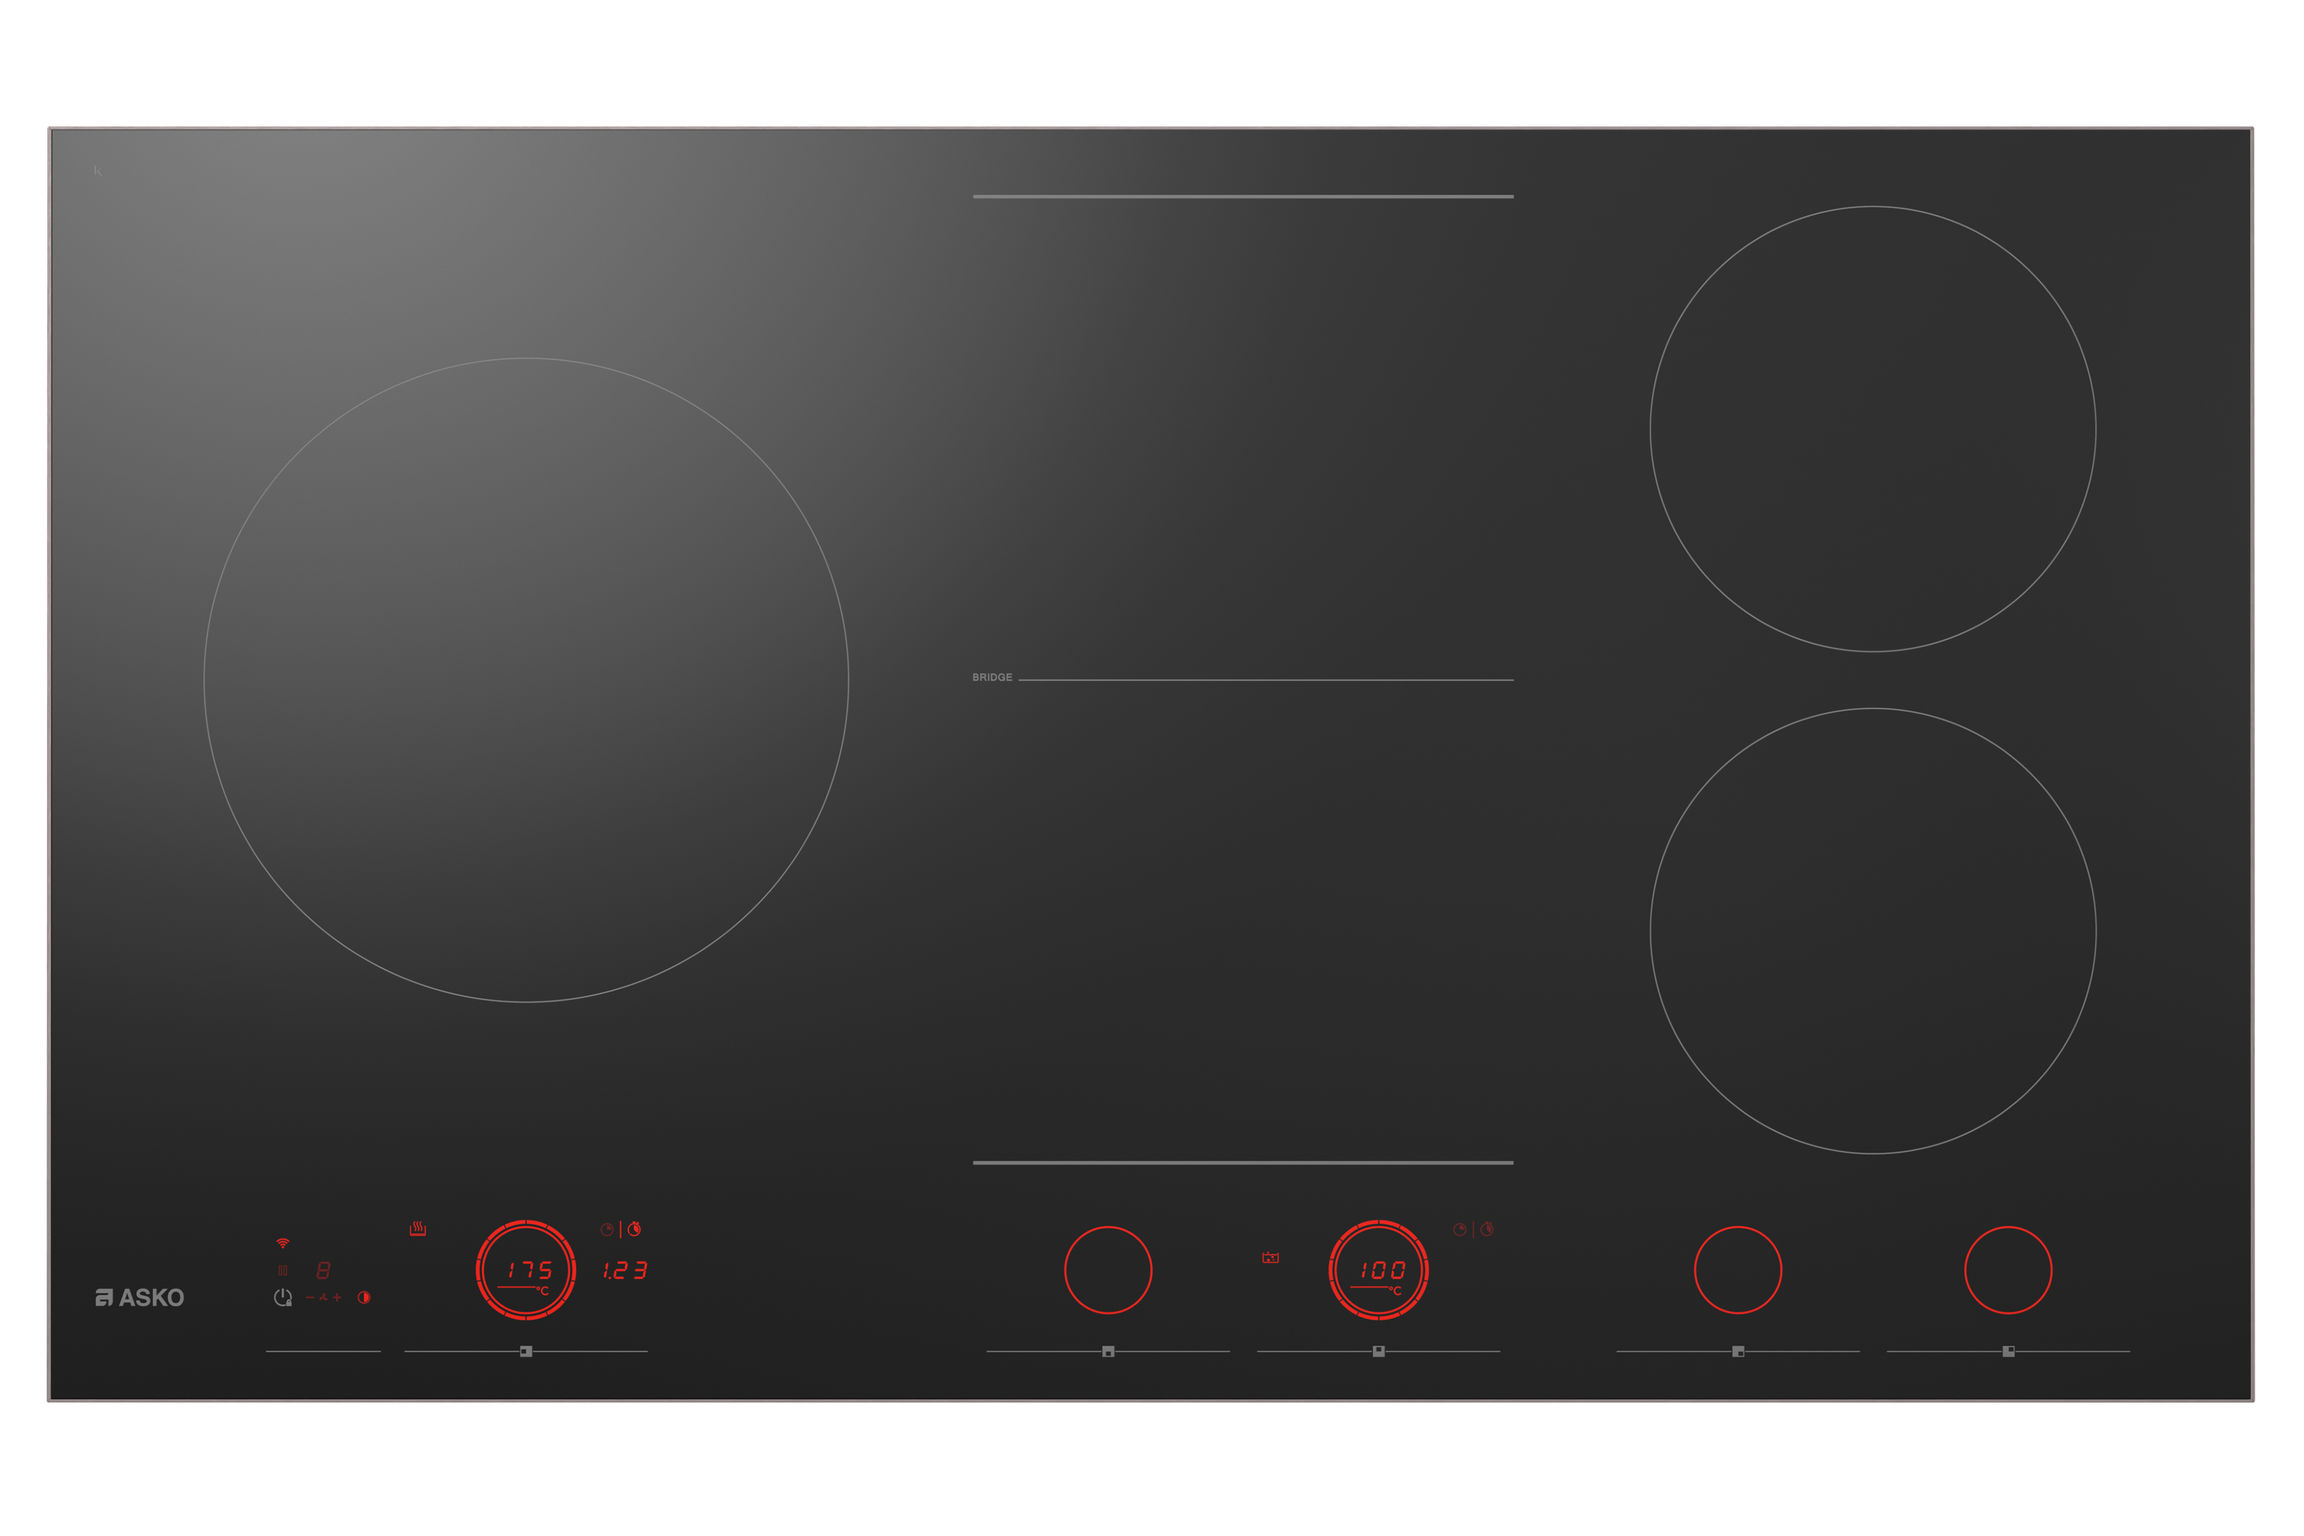 ASKO Celsius°Cooking™ induction hobs and cookware